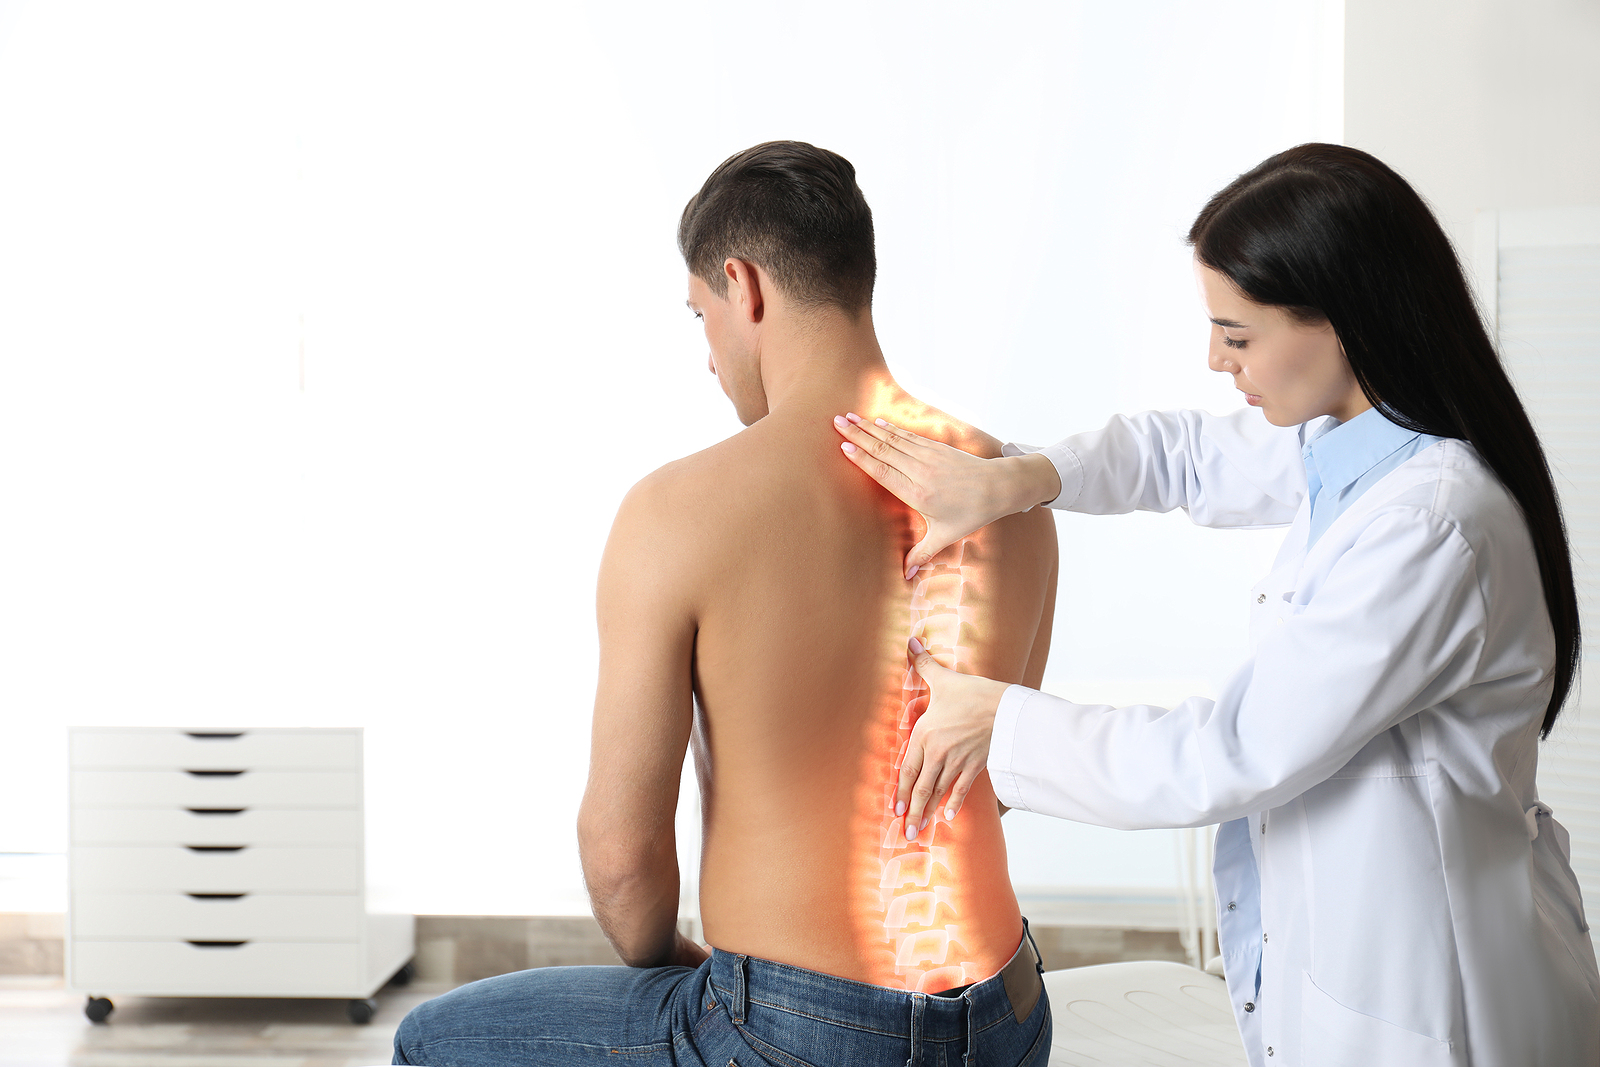 Professional Orthopedist Examining Man In Medical Office. Spinal